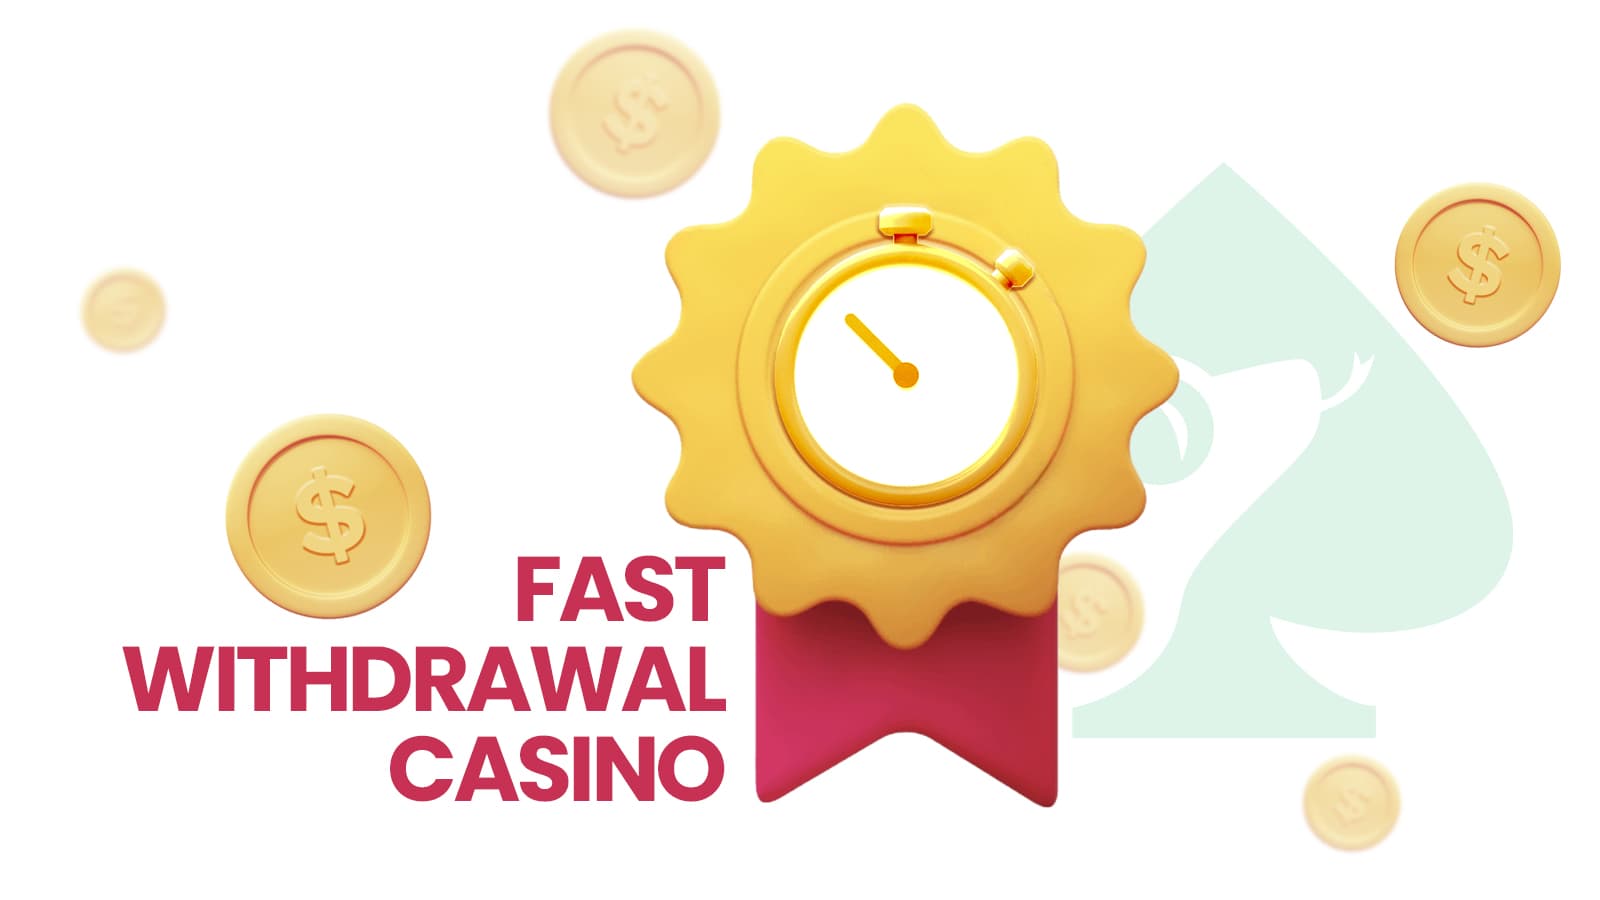 Instant Withdrawal Casinos